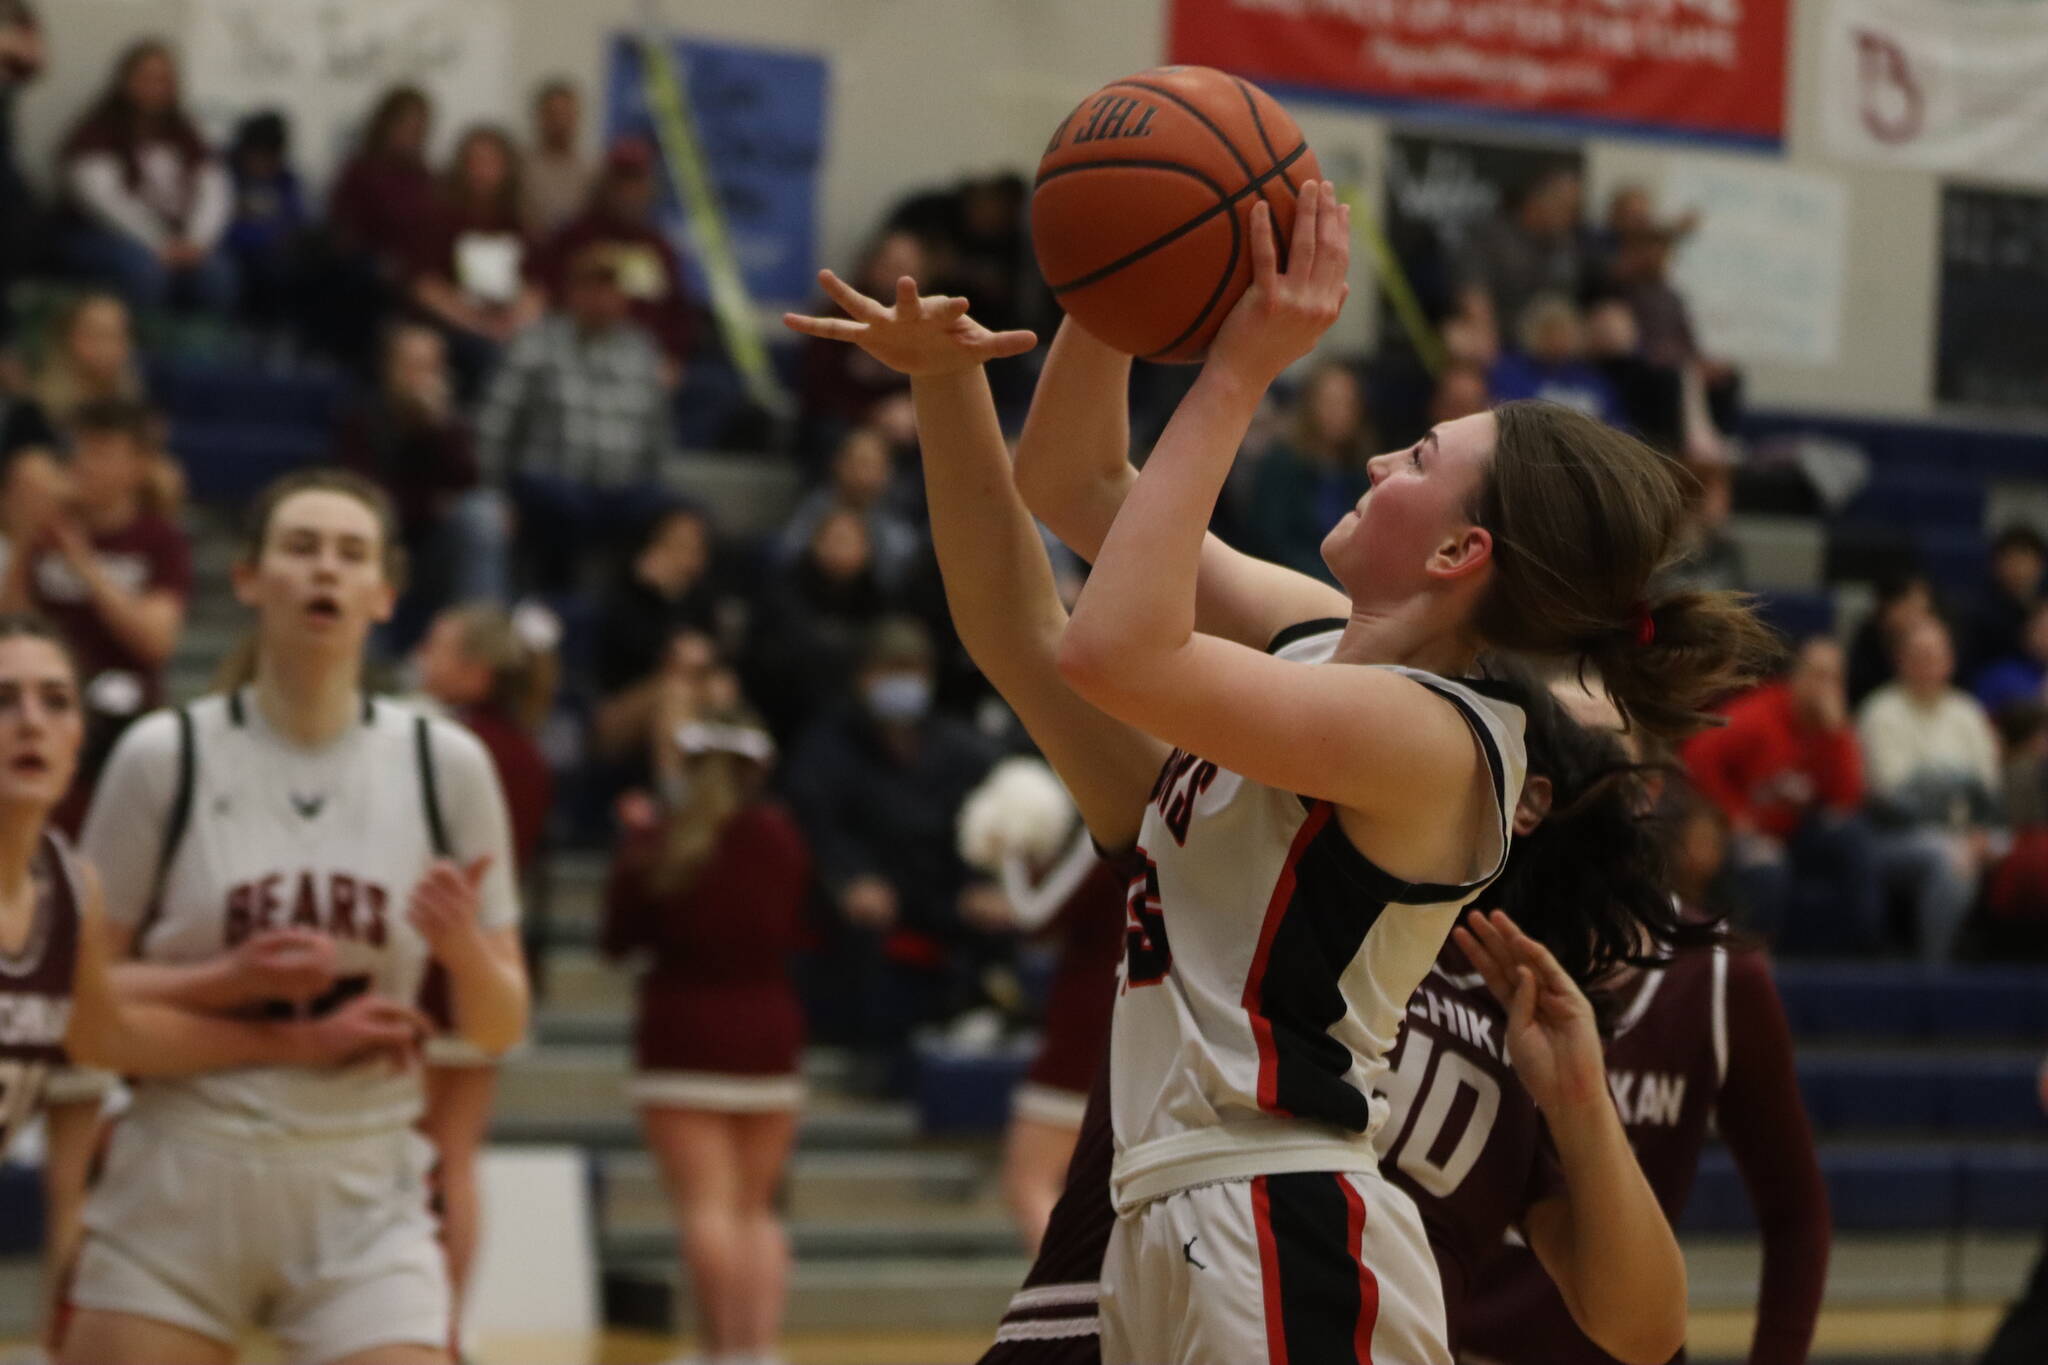 Jonson Kuhn / Juneau Empire 
JDHS freshman Gwen Nizich puts the ball up for a layup against Ketchikan High School on Friday during the two team’s final matchup in the 4A Region V Tournament. Nizich finished the game with a total of 6 points.